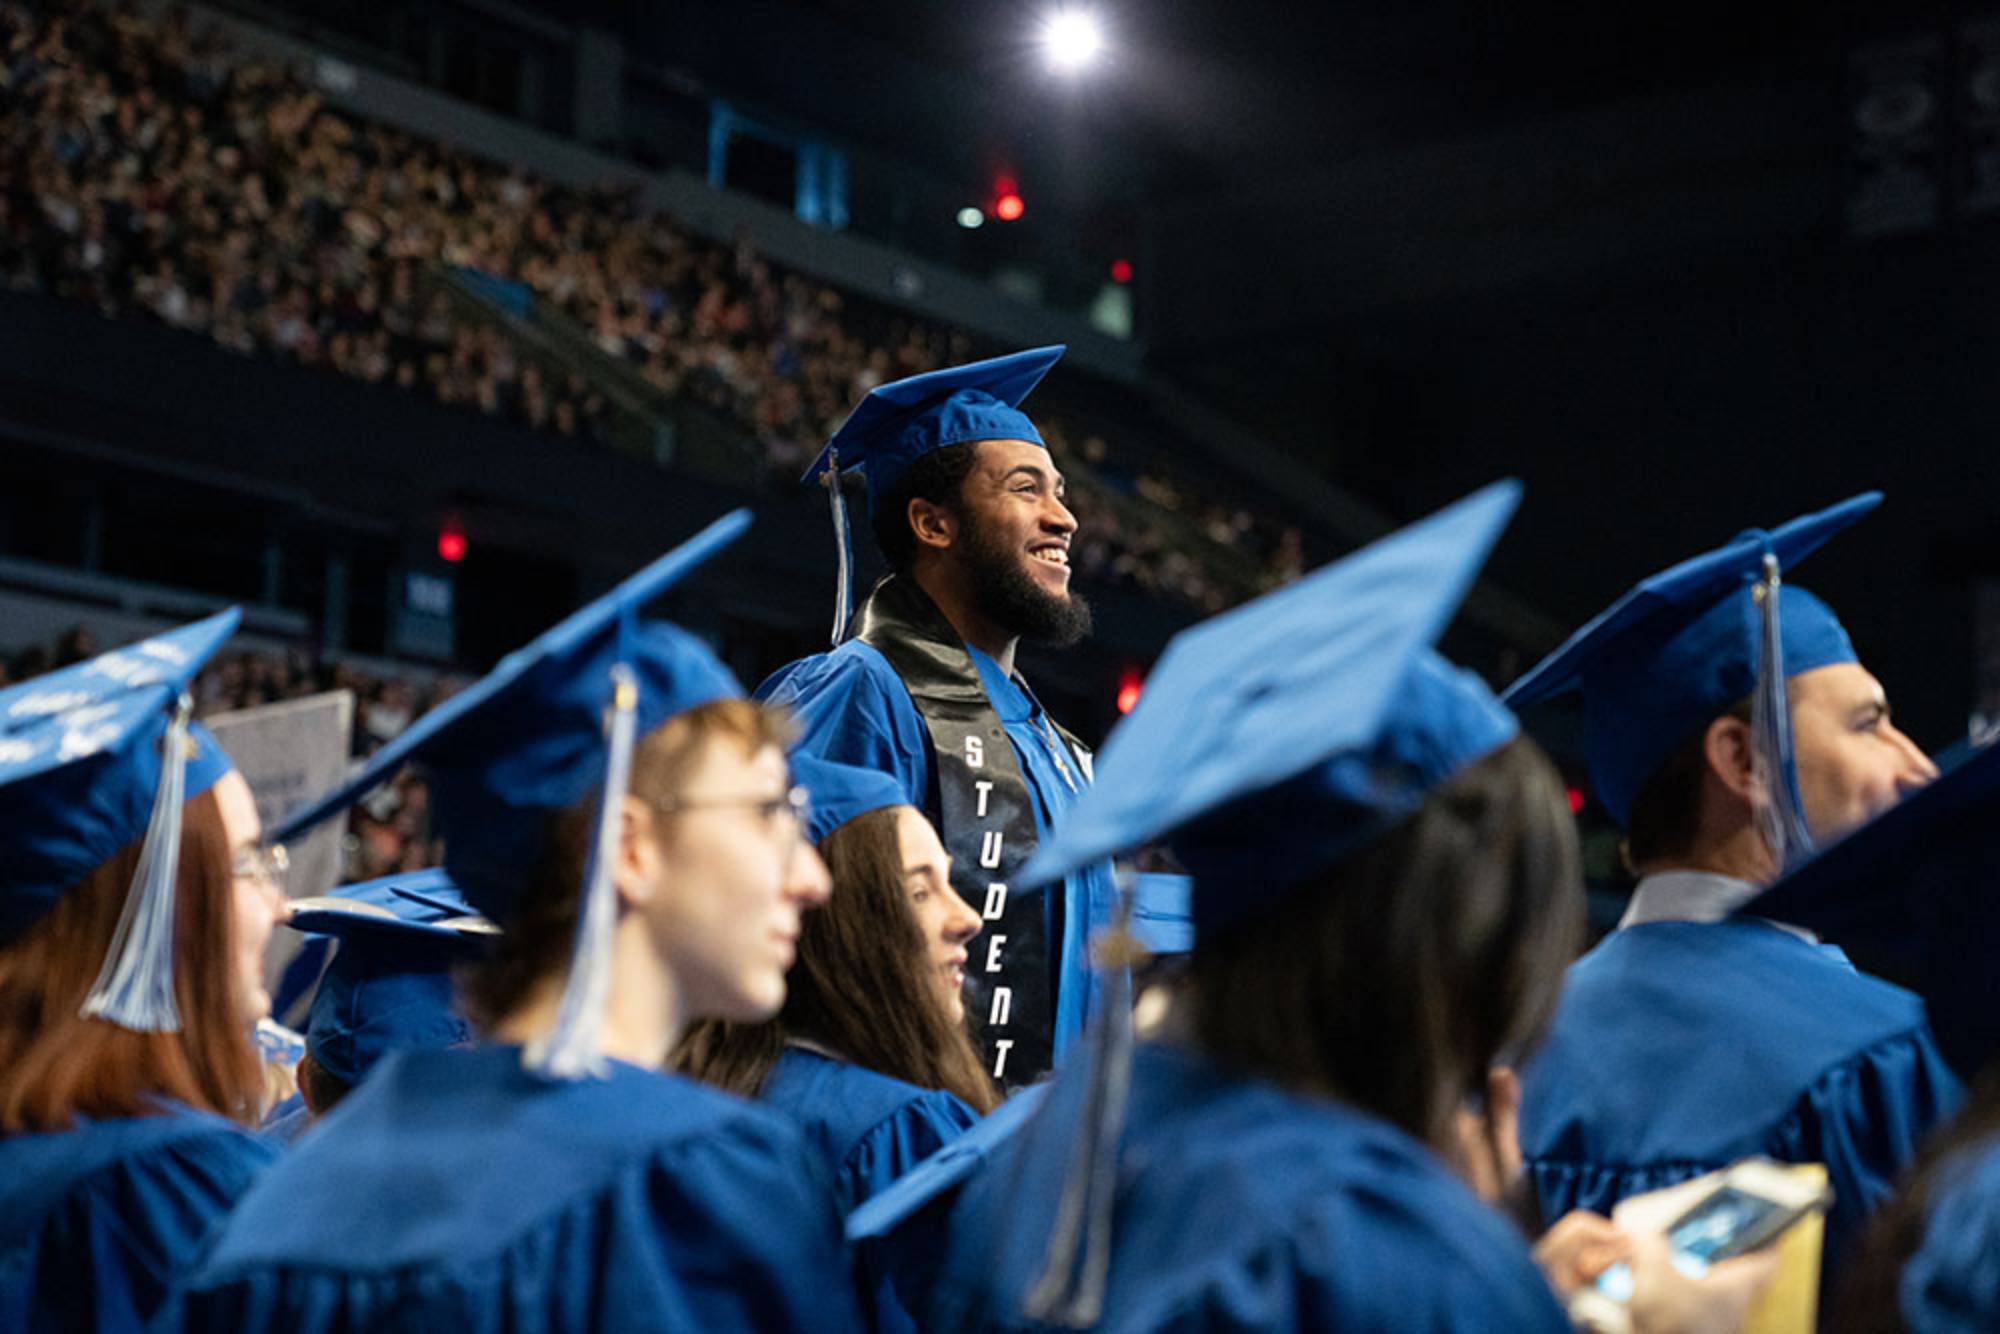 Students participate in a commencement ceremony